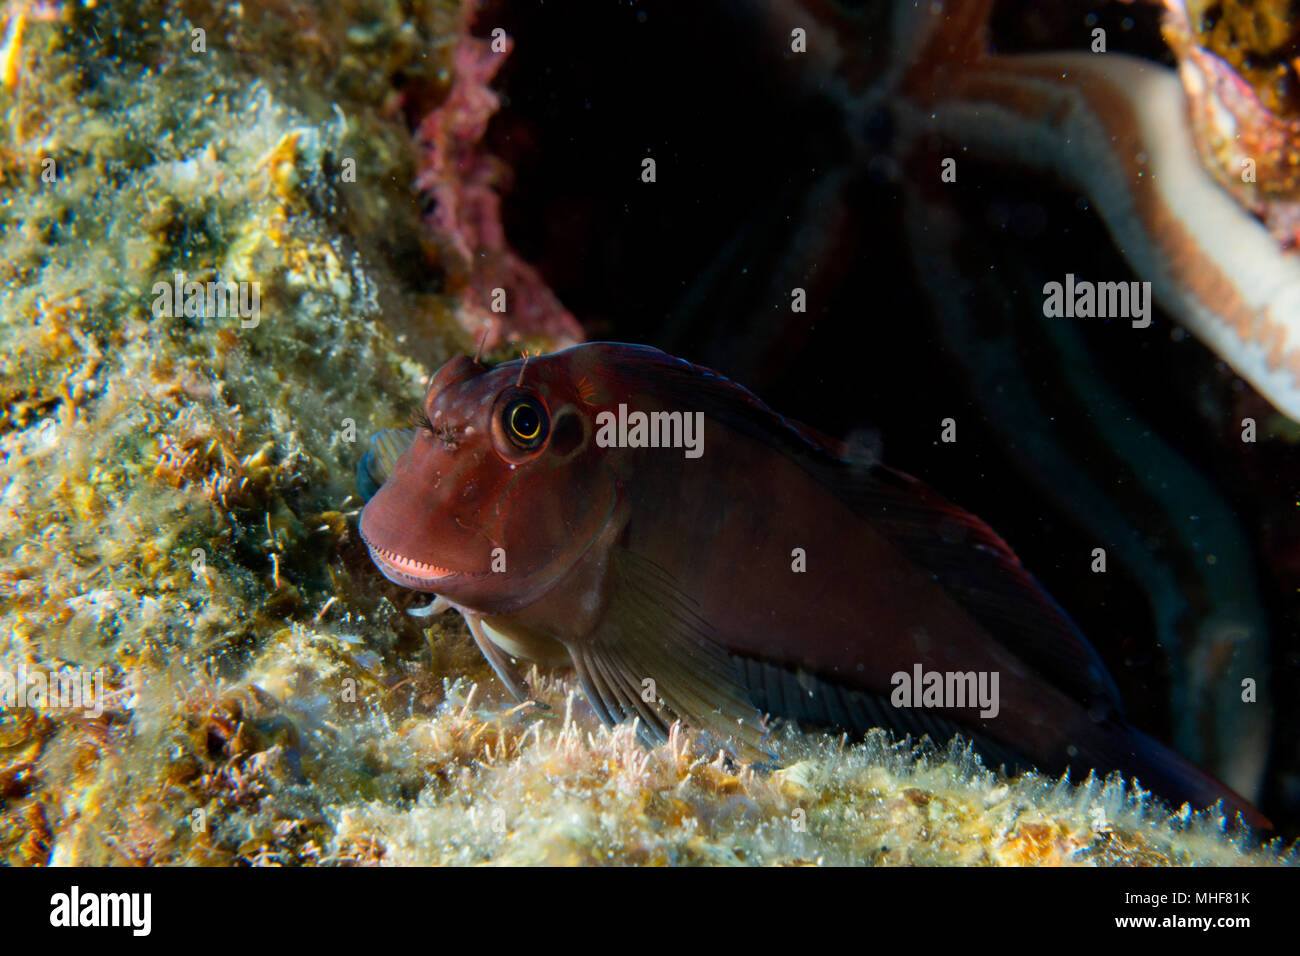 Goby fish close up portrait while scuba diving Stock Photo